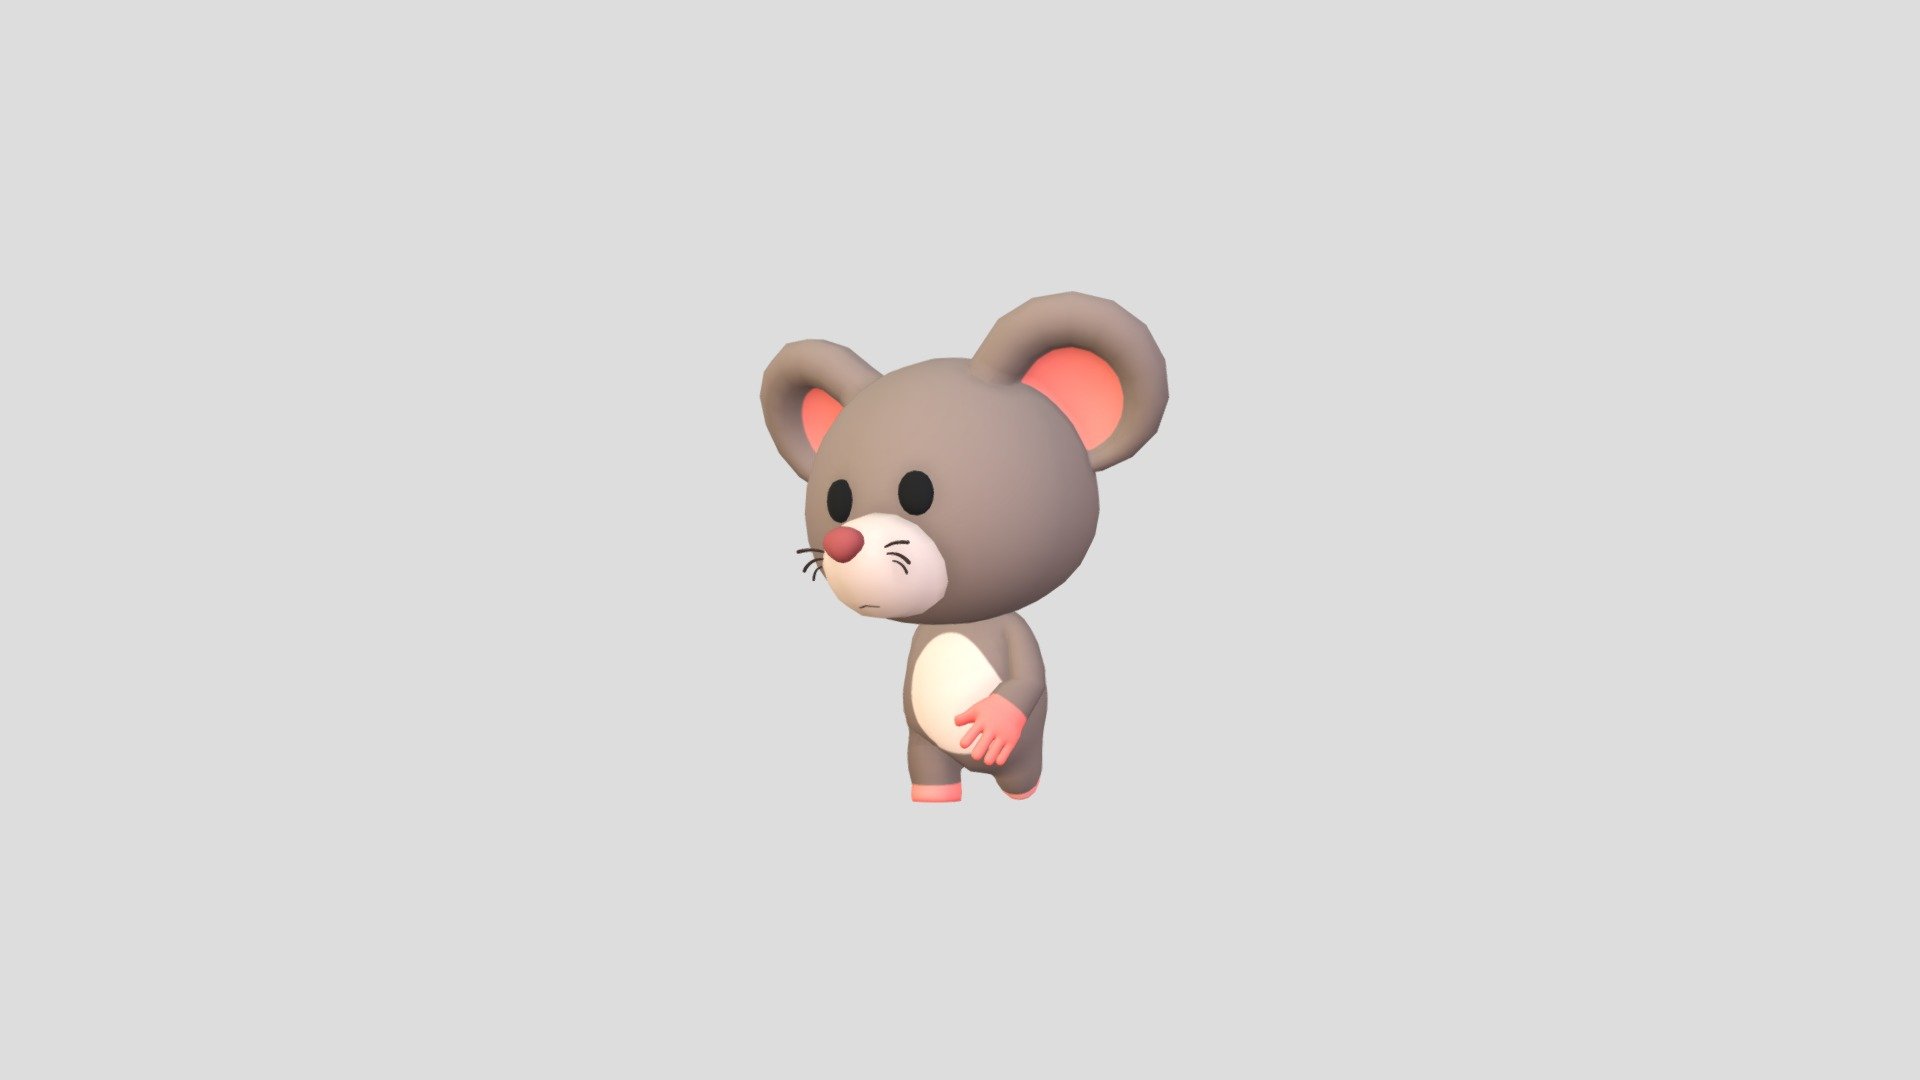 Rigged Rat Character 3d model.      
    


File Format      
 
- 3ds max 2022  
 
- FBX  
 
- OBJ  
    


Clean topology    

Rig with CAT in 3ds Max                          

Bone and Weight skin are in fbx file       

No Facial Rig    

No Animation    

Non-overlapping unwrapped UVs        
 


PNG texture               

2048x2048                


- Base Color                        

- Normal                            

- Roughness                         



4,028 polygons                          

3,940 vertexs                          
 - Character184 Rigged Rat - Buy Royalty Free 3D model by BaluCG 3d model